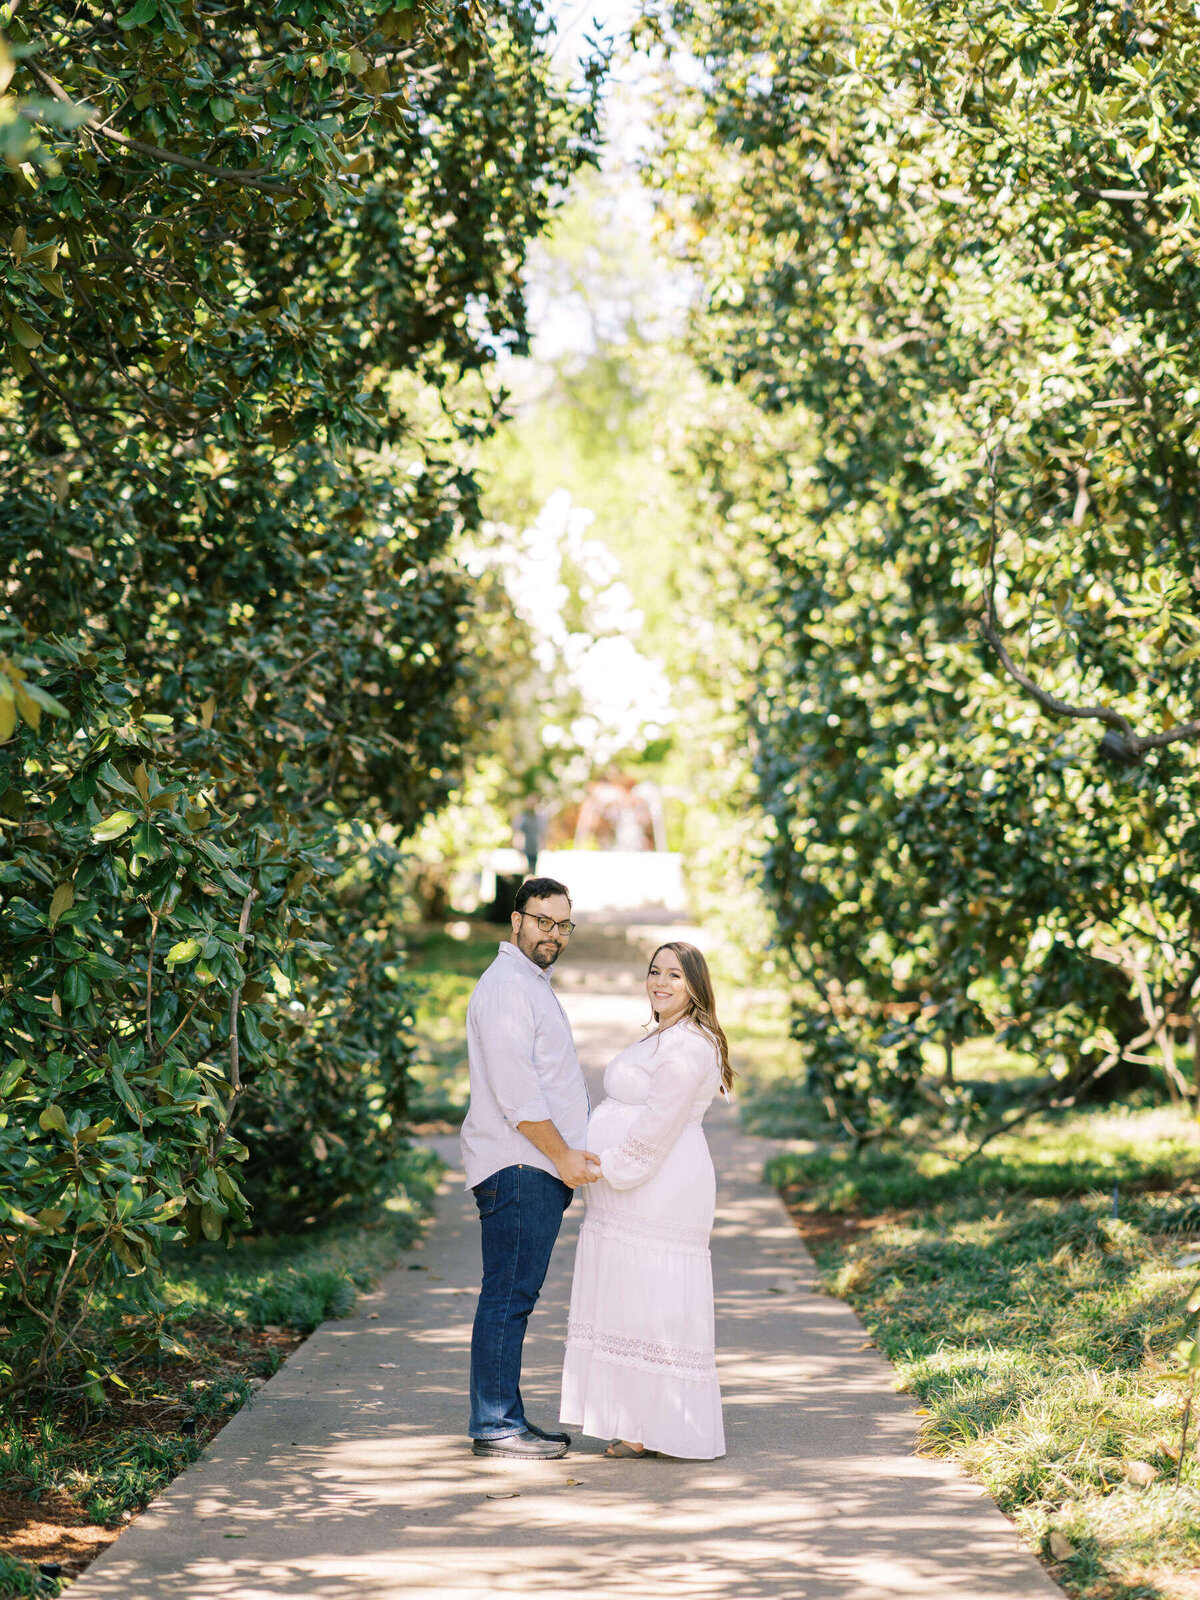 12 Dallas Arboretum Maternity Family Session Kate Panza Photography Kim and Nic